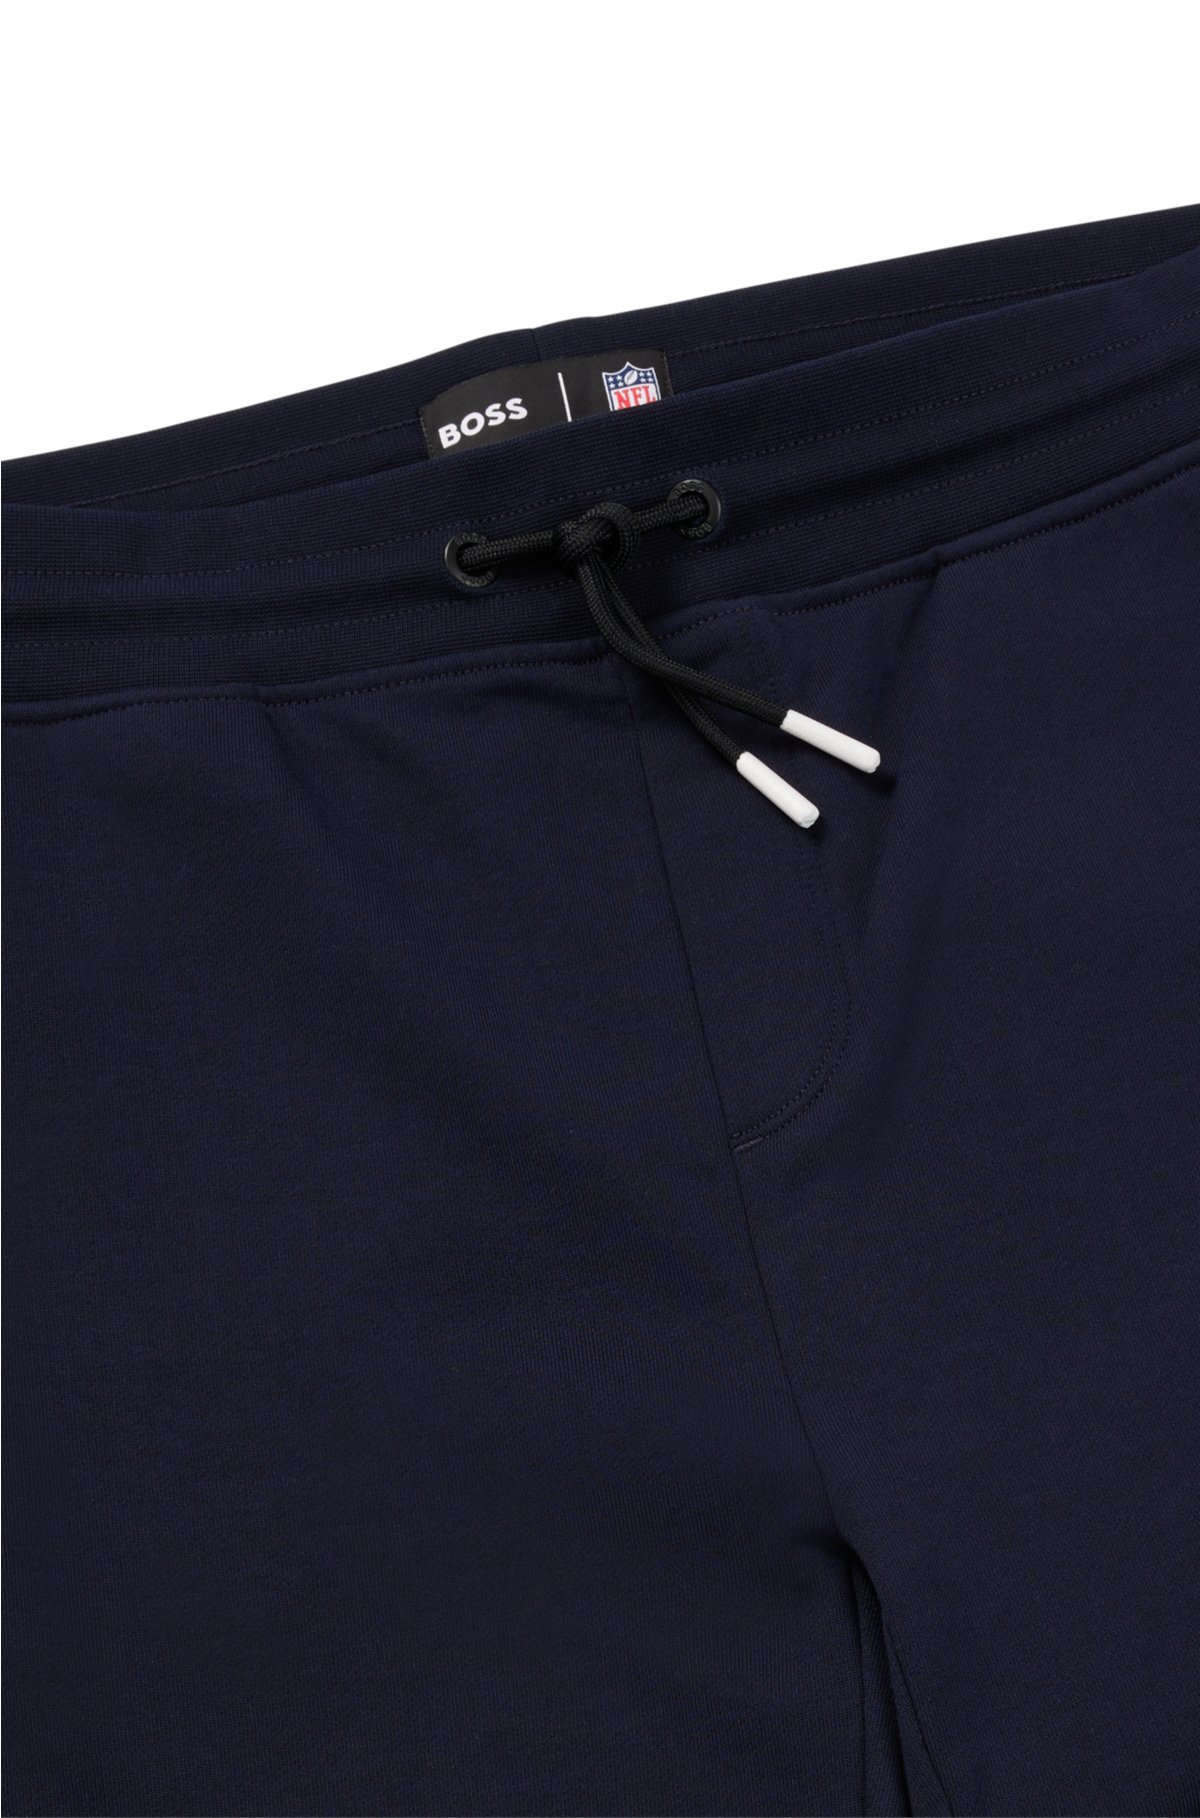 BOSS x NFL cotton-terry shorts with collaborative branding, Cowboys